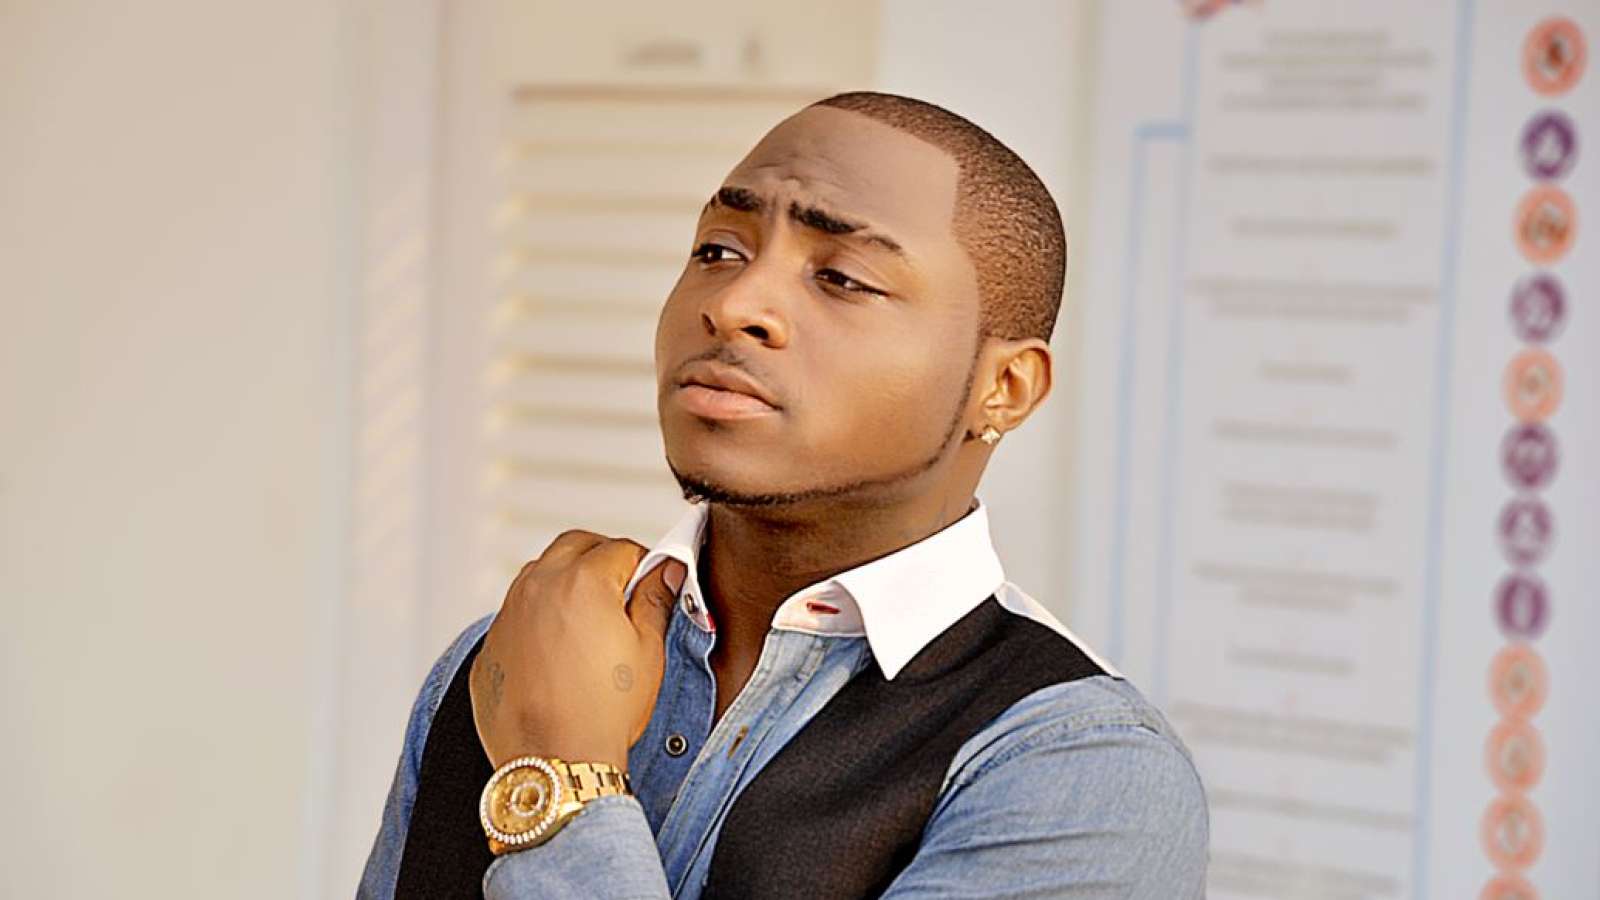 Watch shocking moment Davido slapped a fan for trying to take a selfie